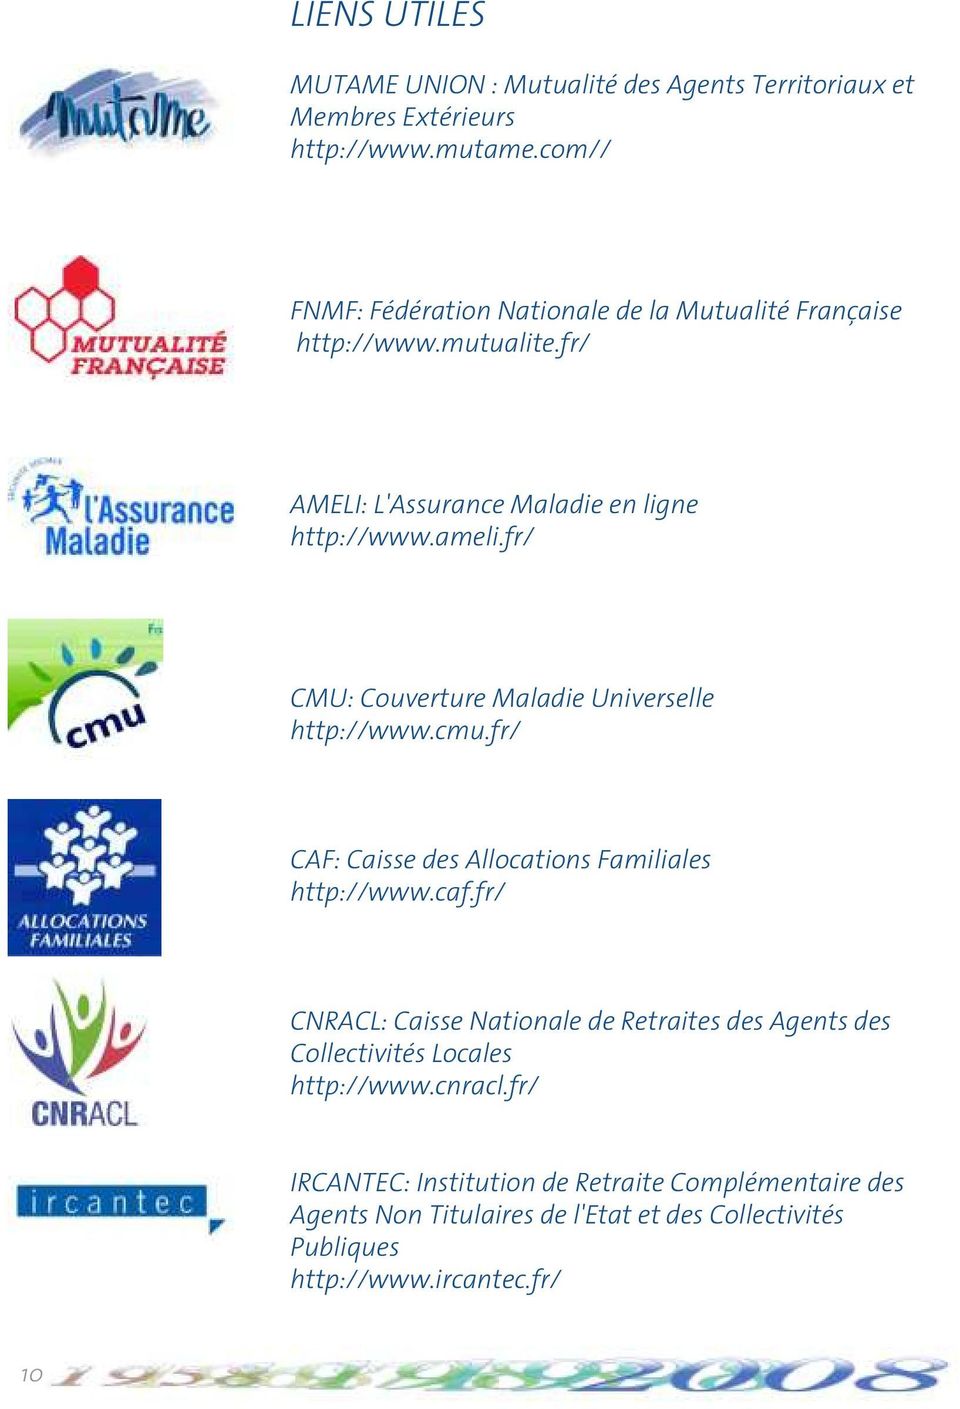 fr/ CMU: Couverture Maladie Universelle http://www.cmu.fr/ CAF: Caisse des Allocations Familiales http://www.caf.